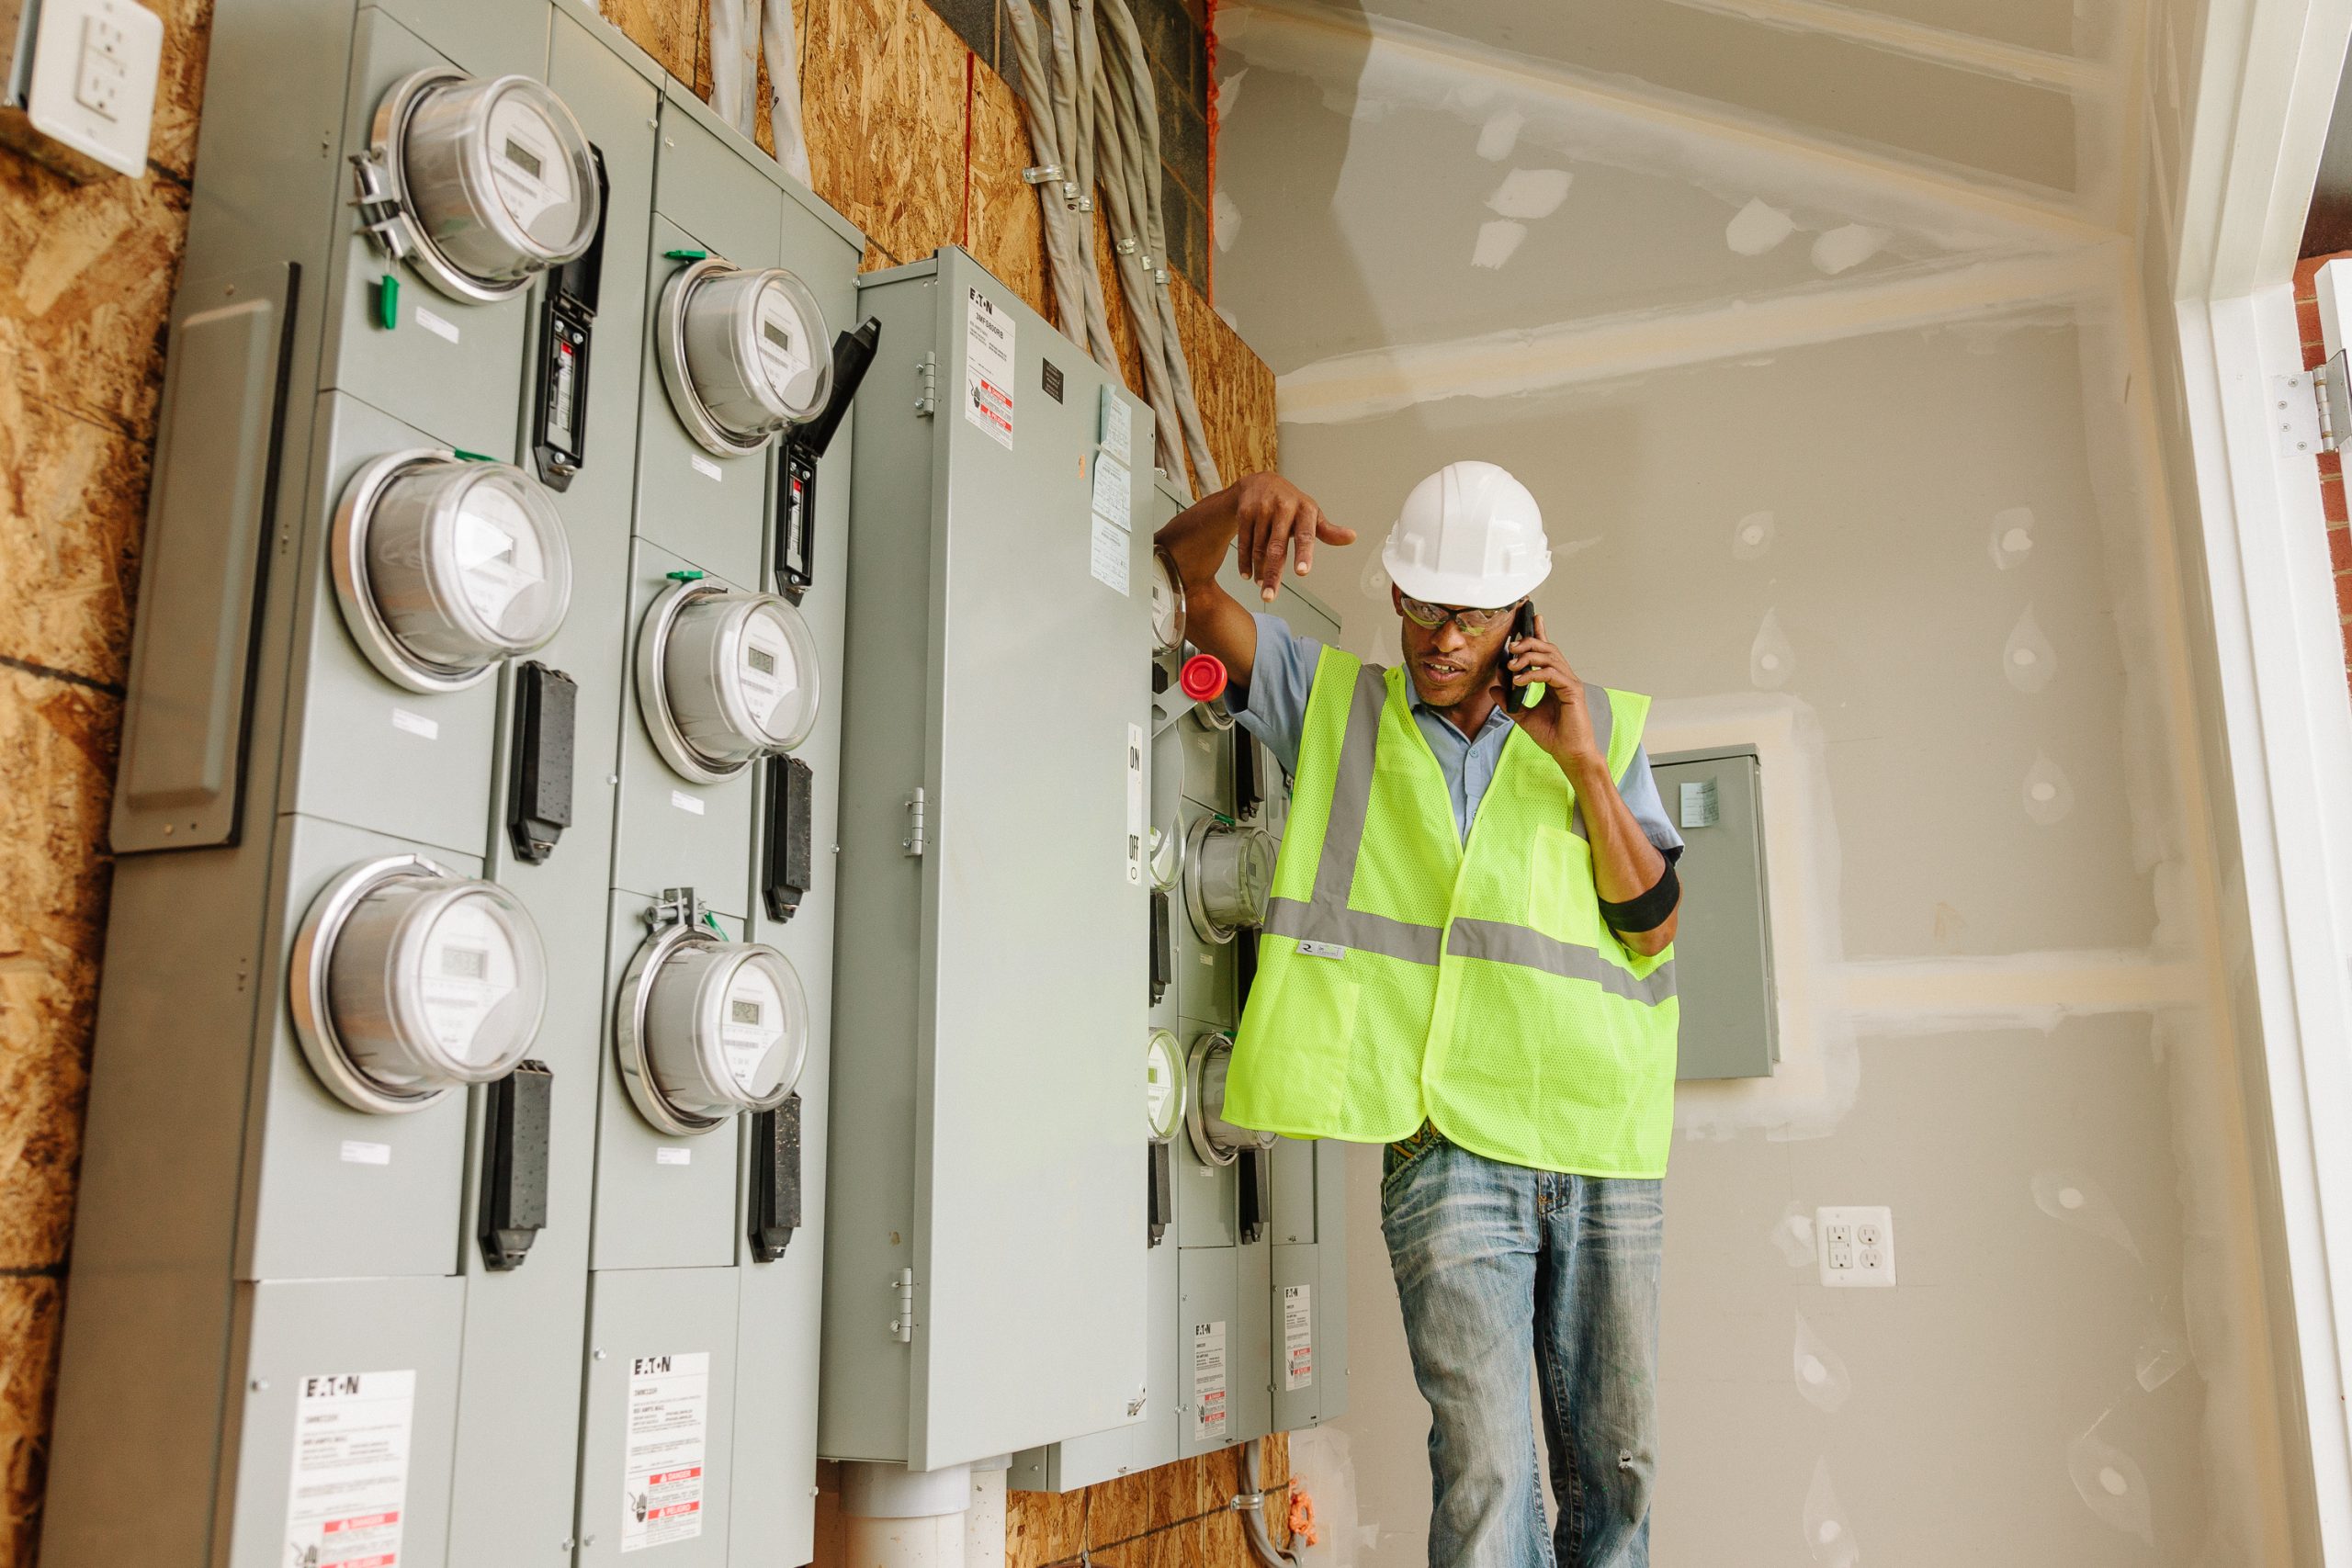 Common duties on the job of an electrician